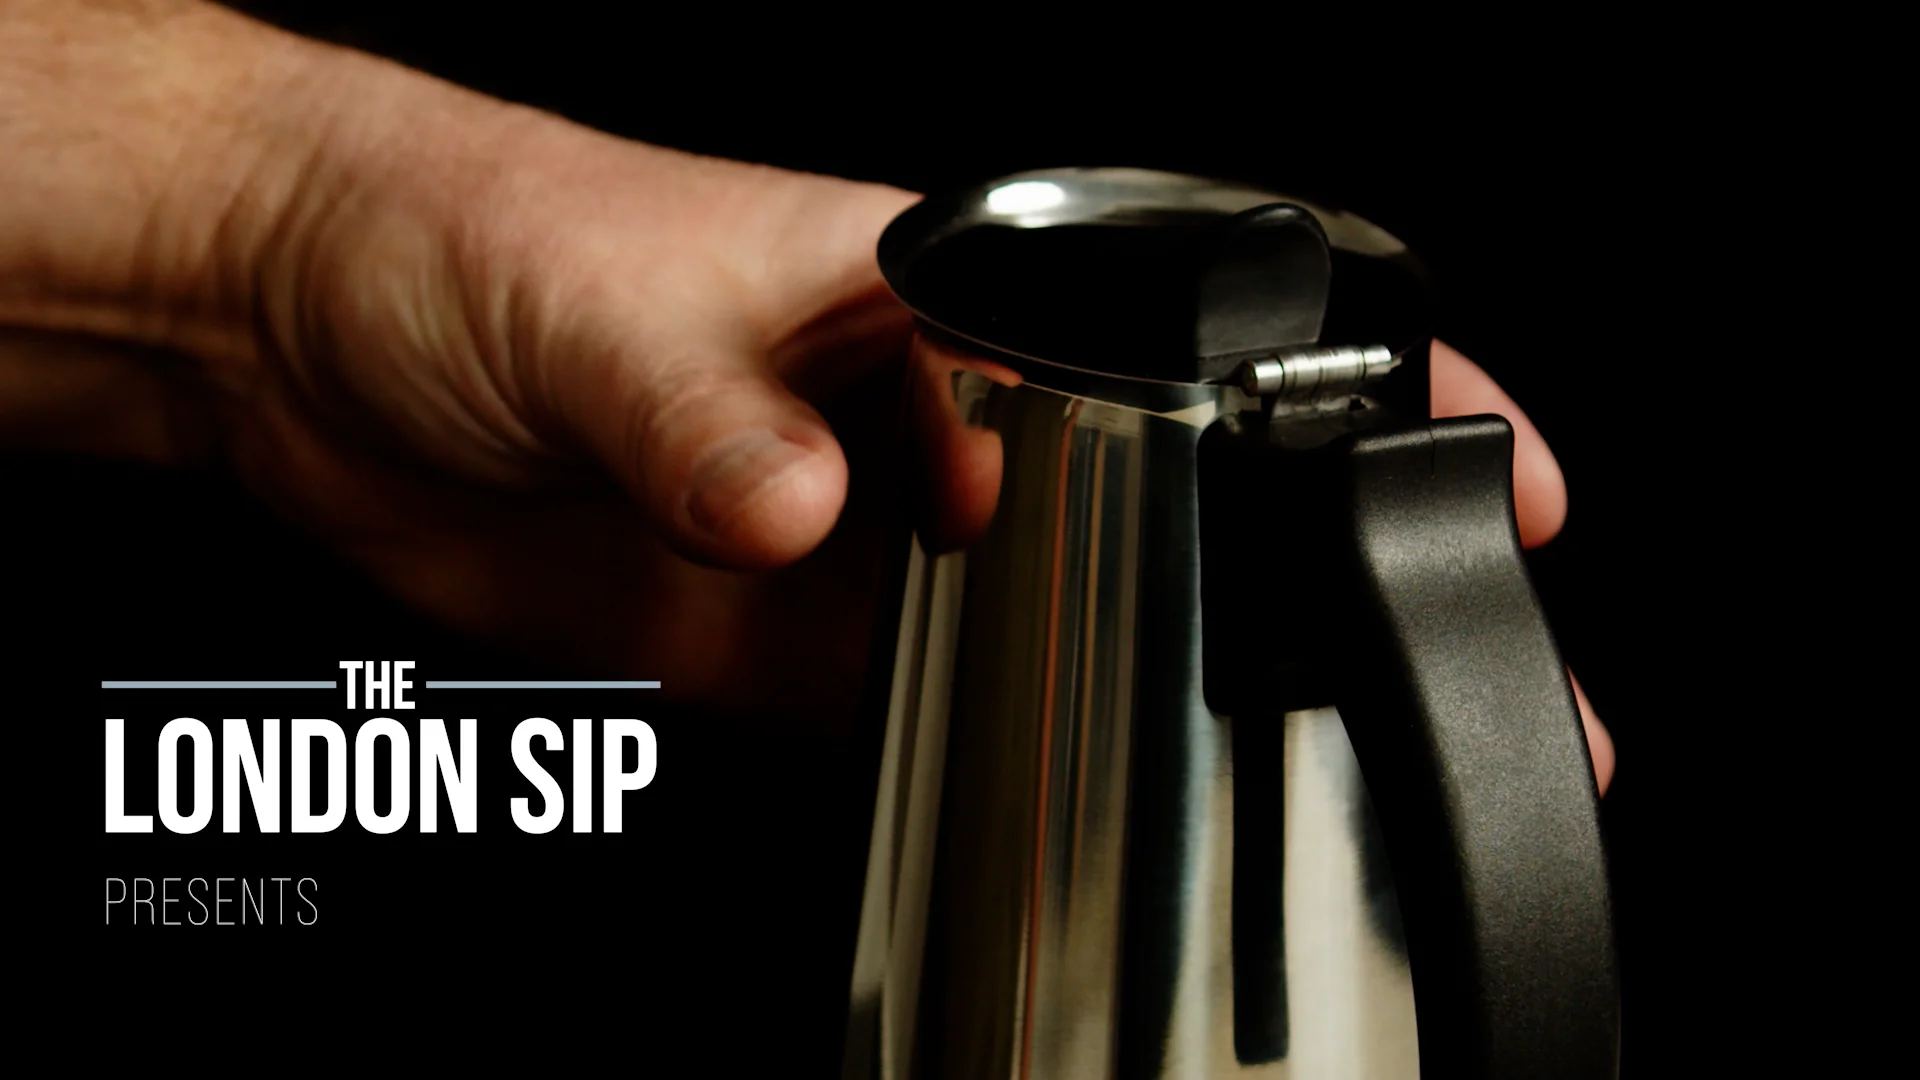 London Sip 3 Cup Stainless Steel Espresso Maker | Silver